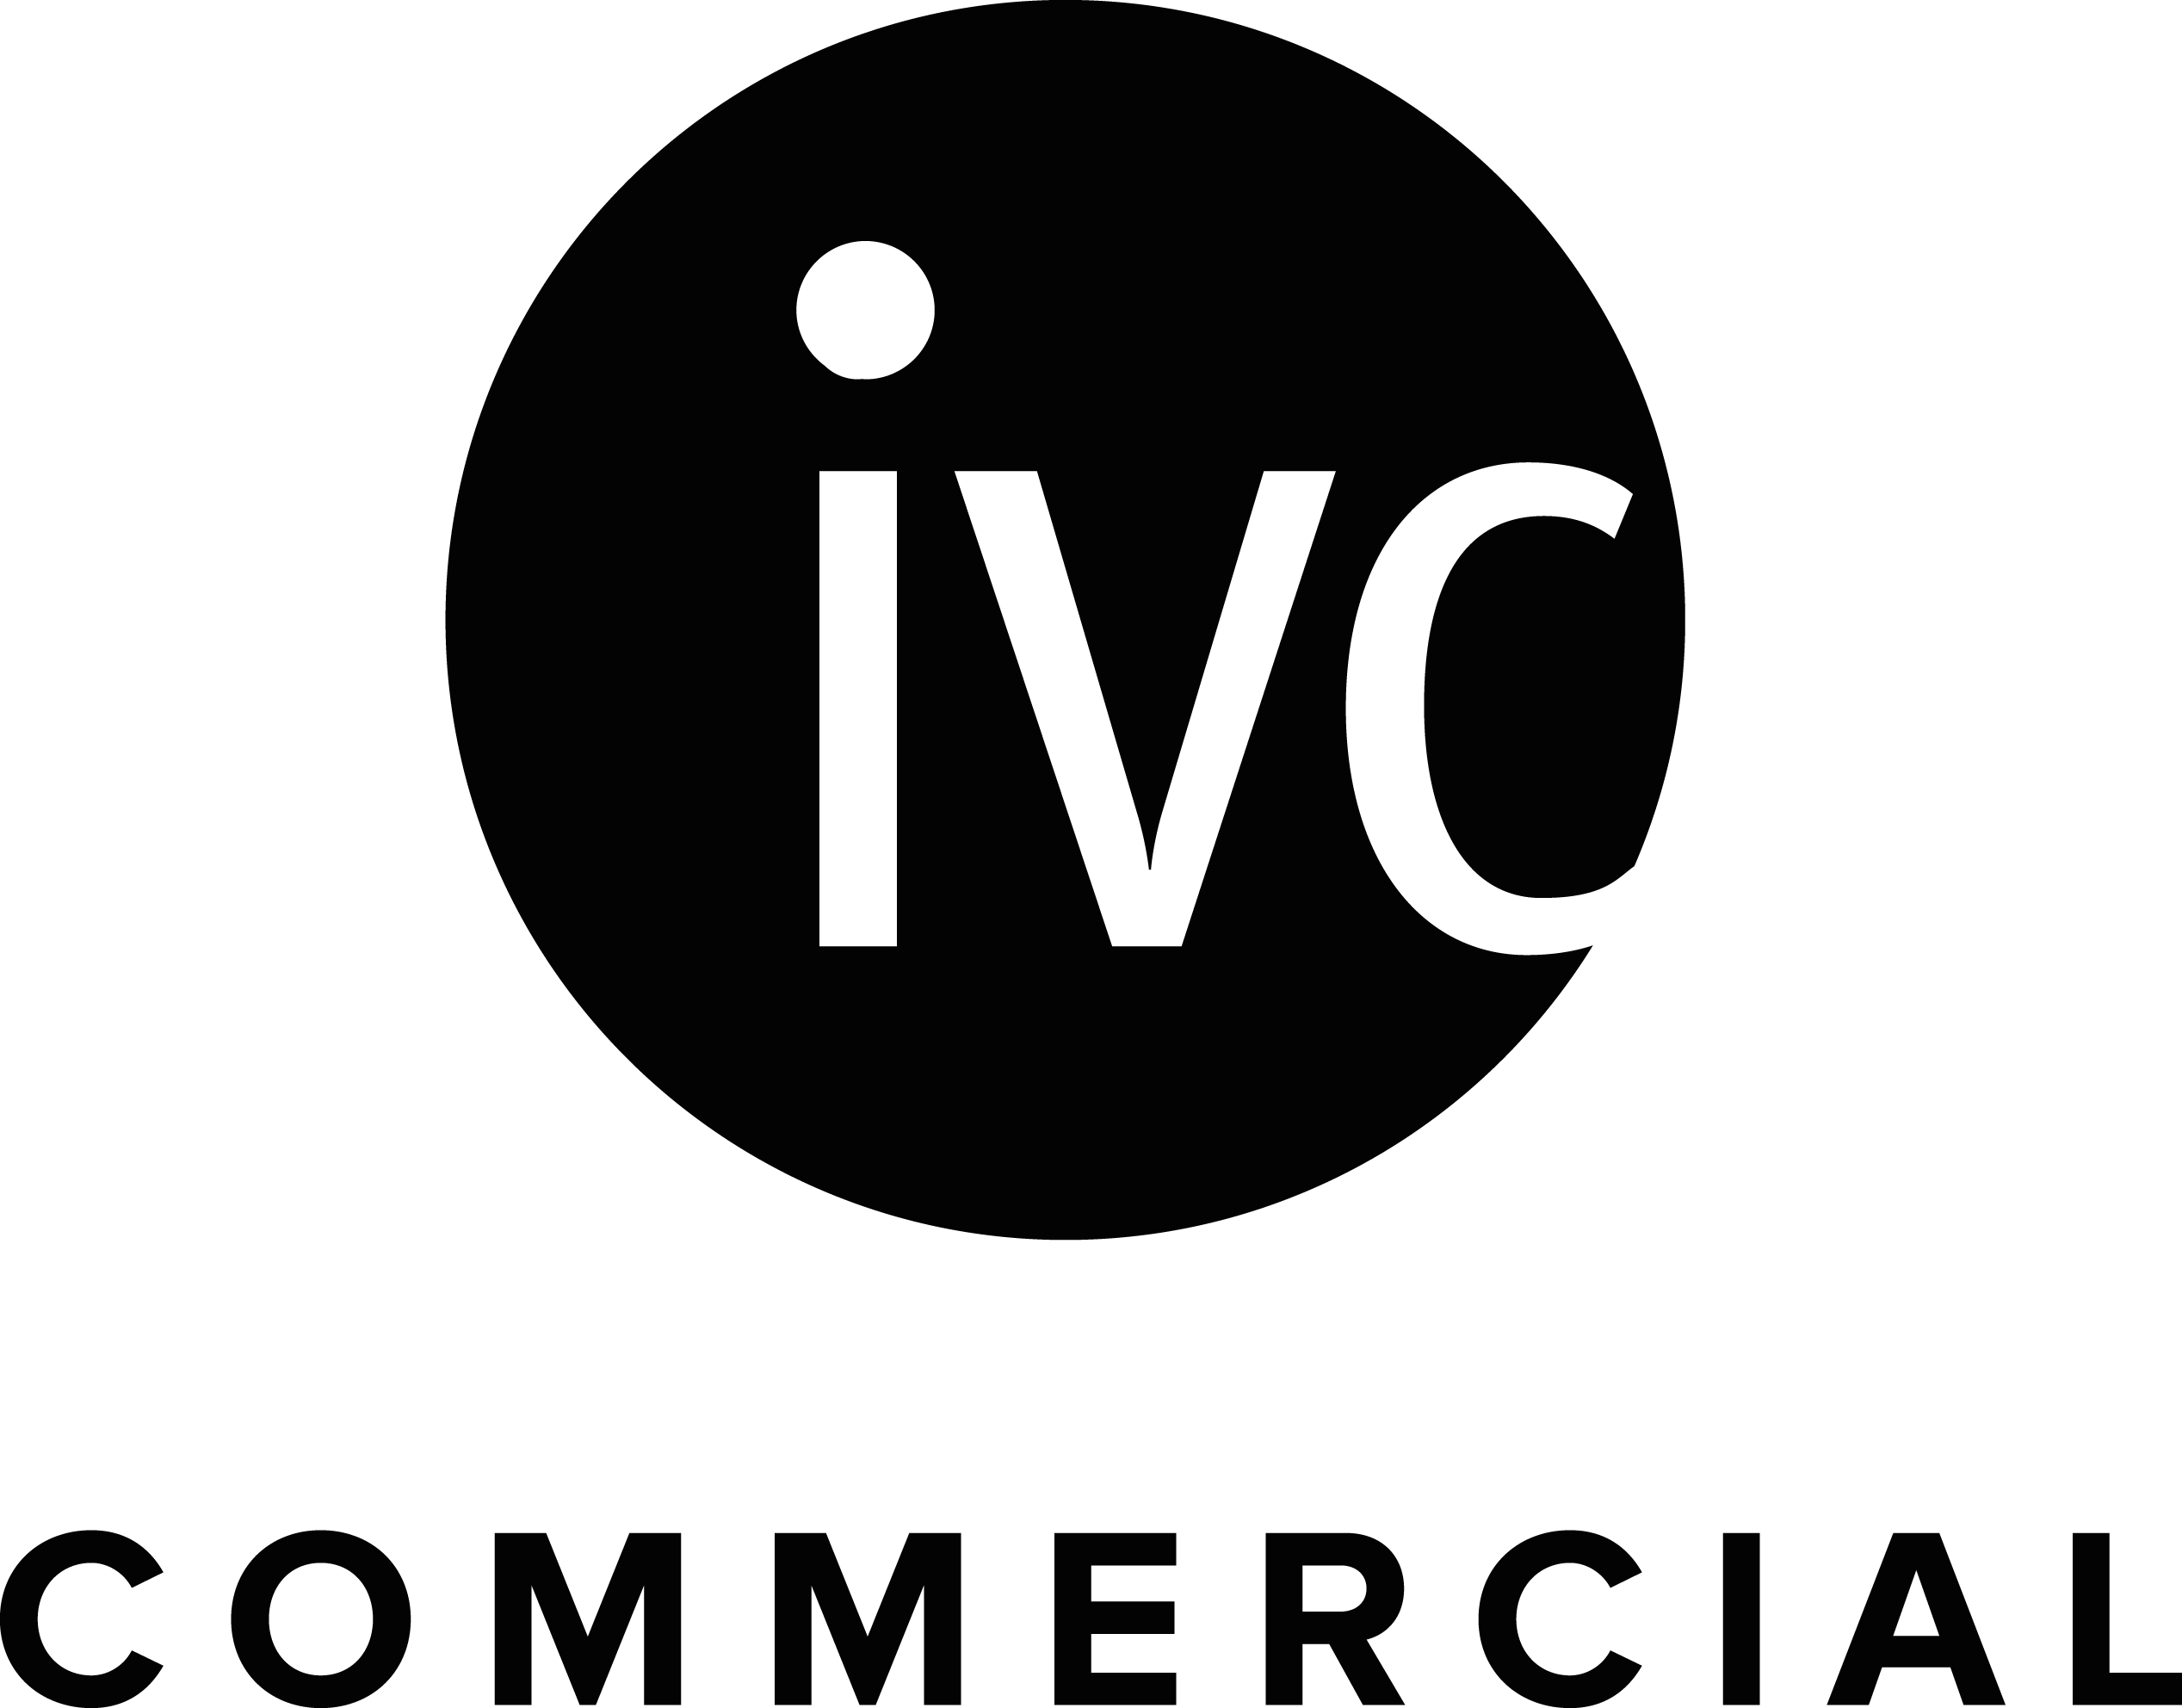 IVC Commercial